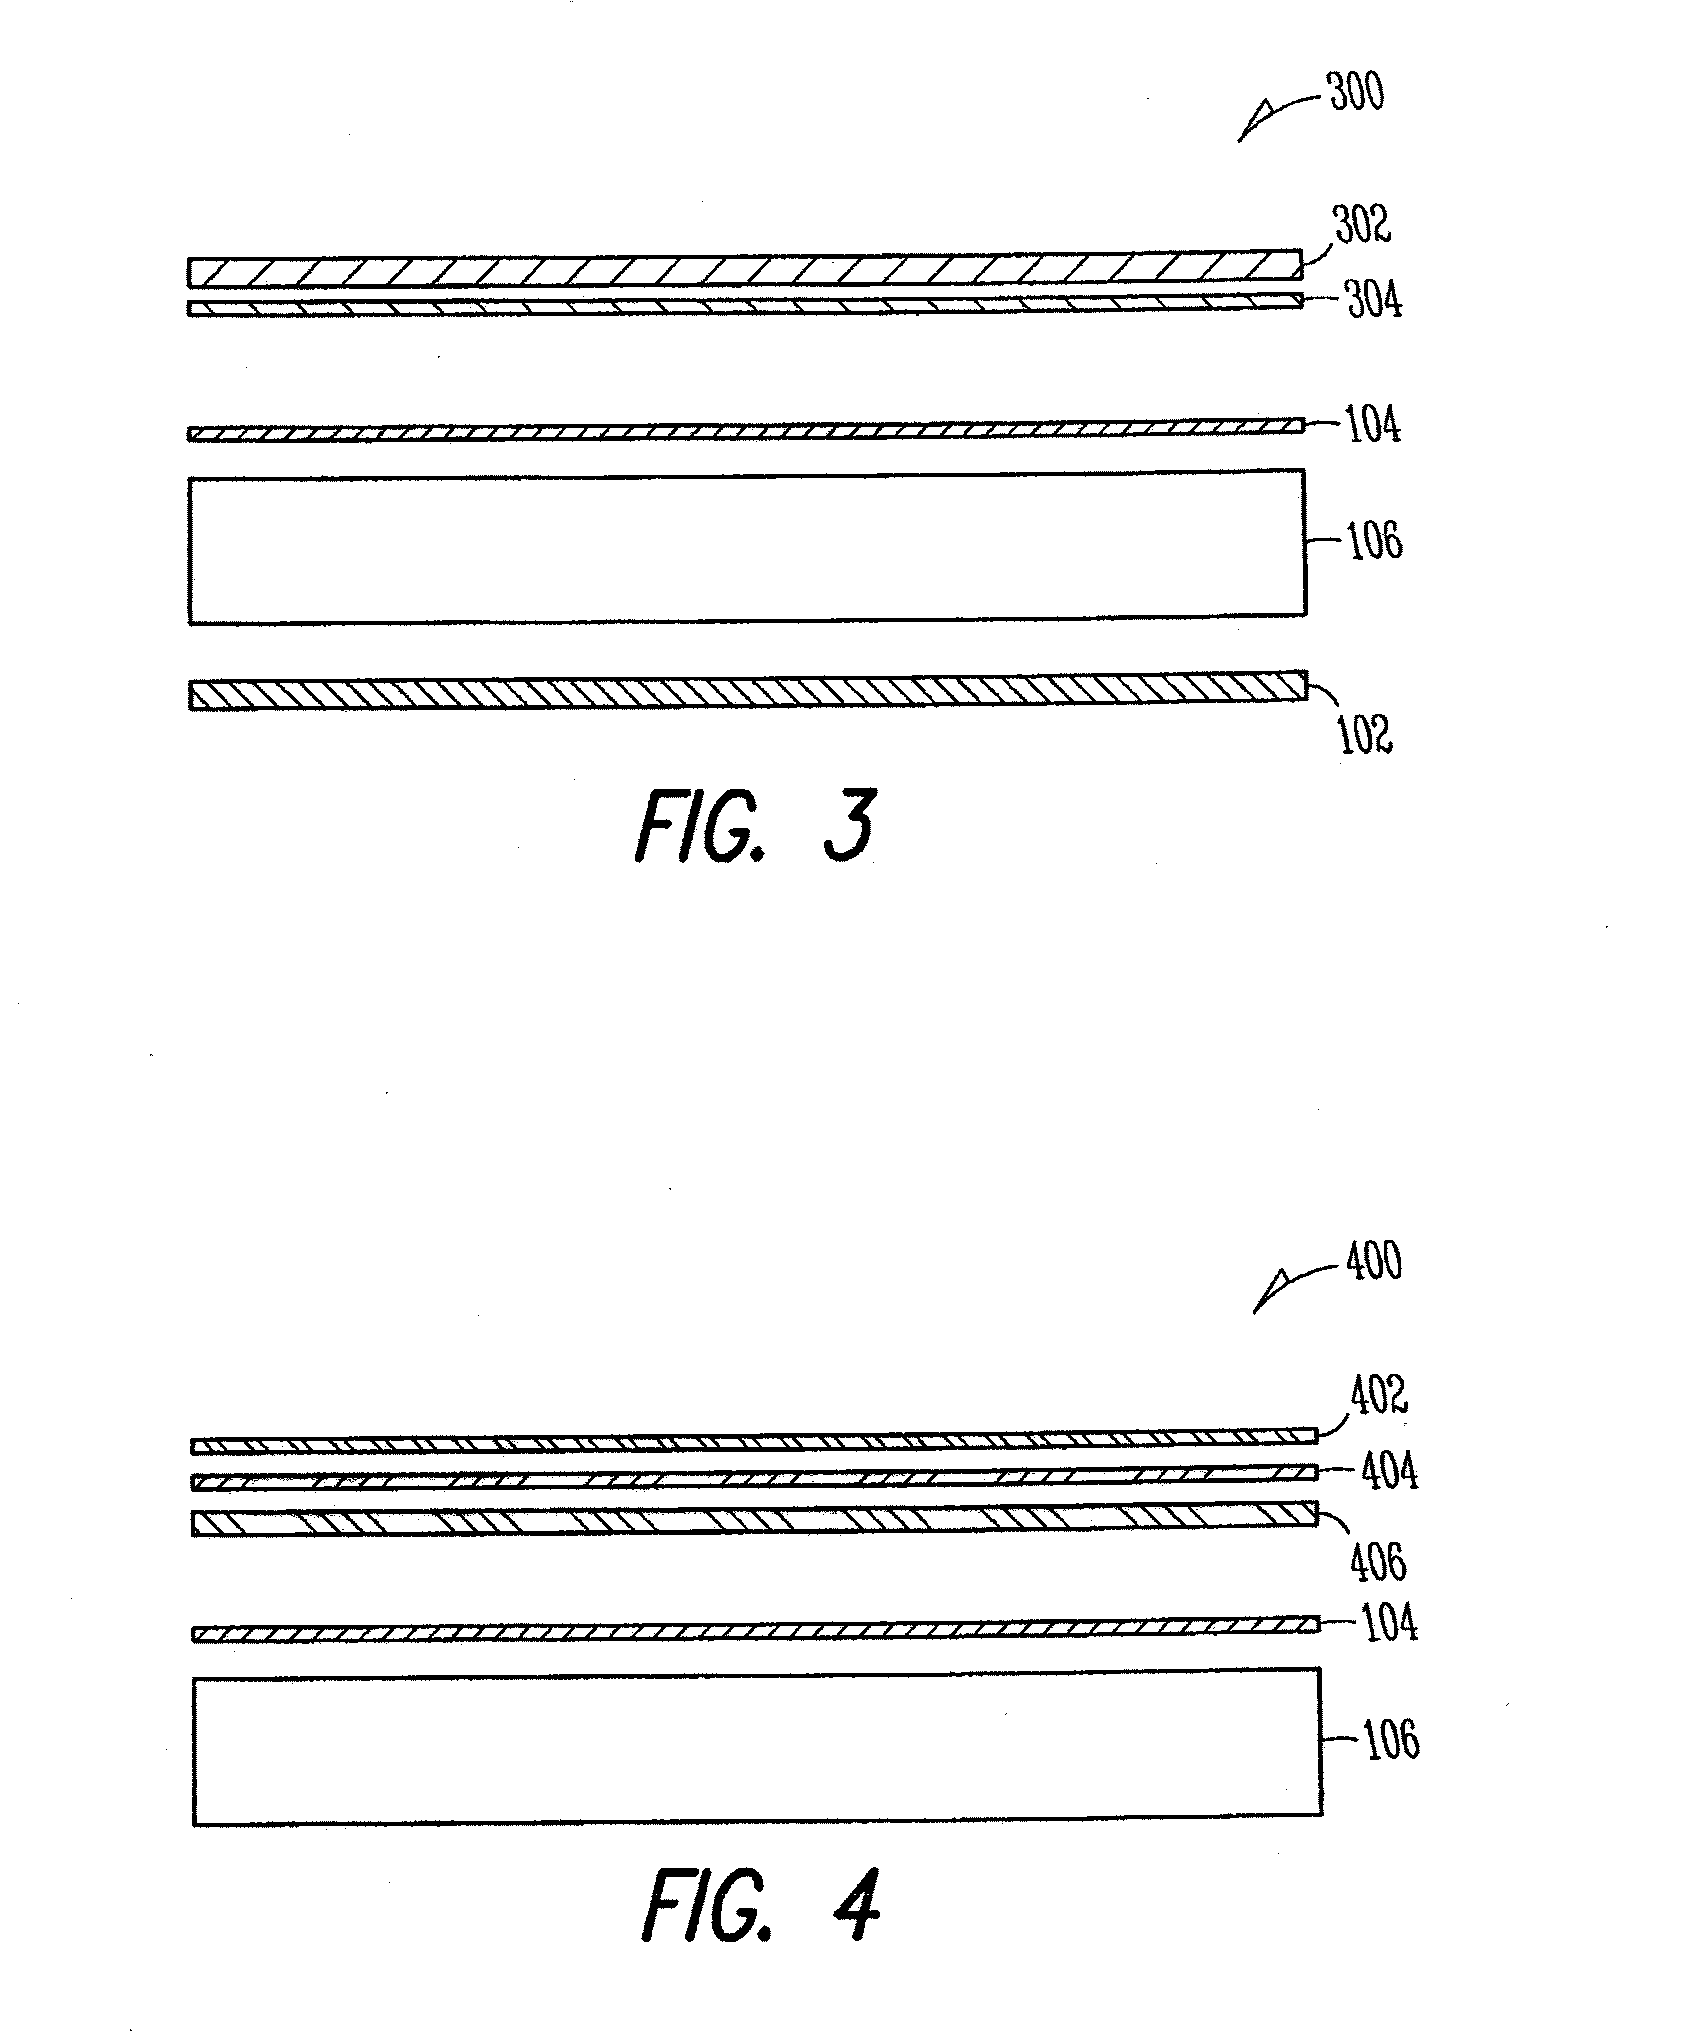 Fire retardant biolaminate composite and related assembly